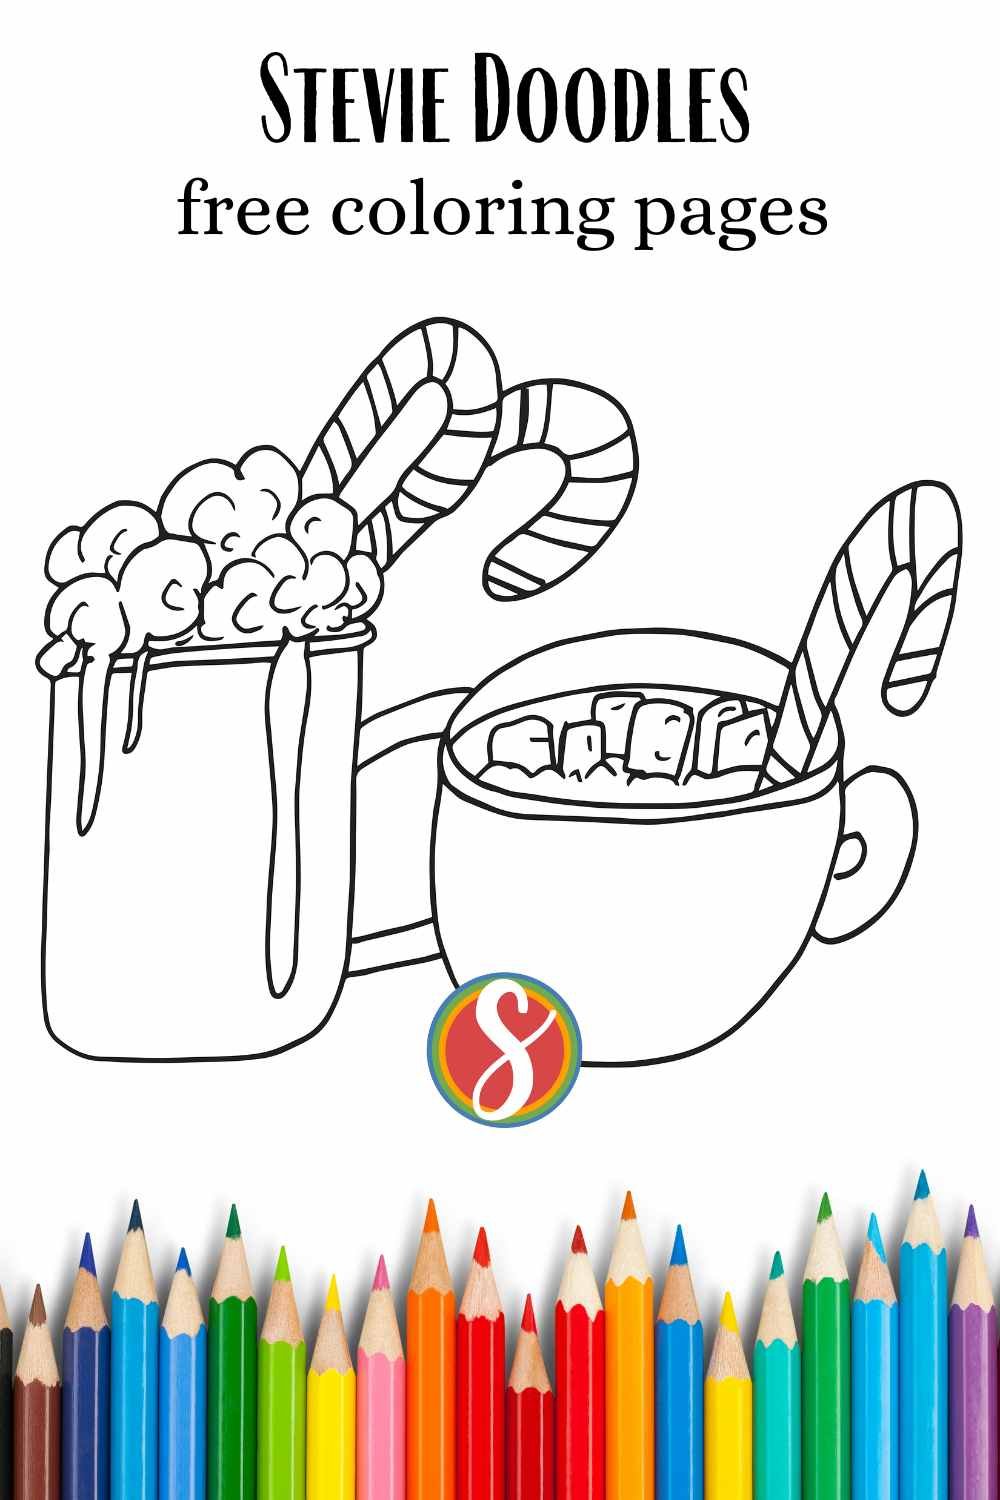 2 cups of hot cocoa with candy canes to color